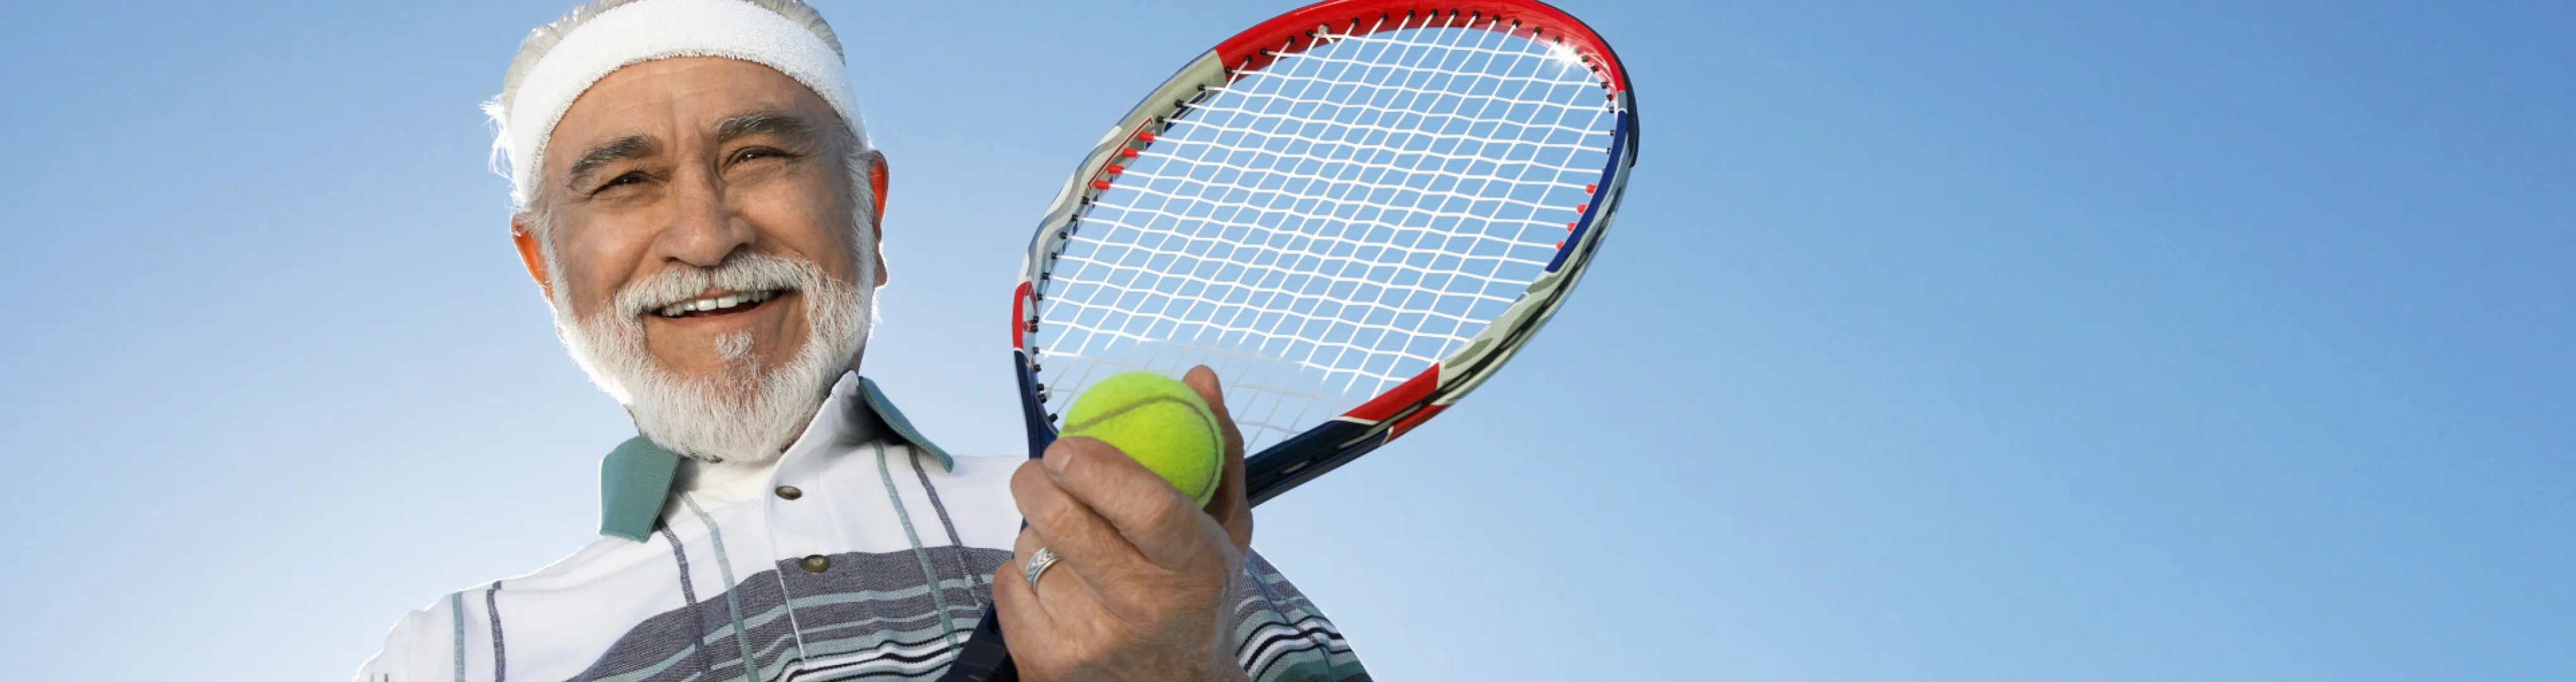 Man with tennis racket